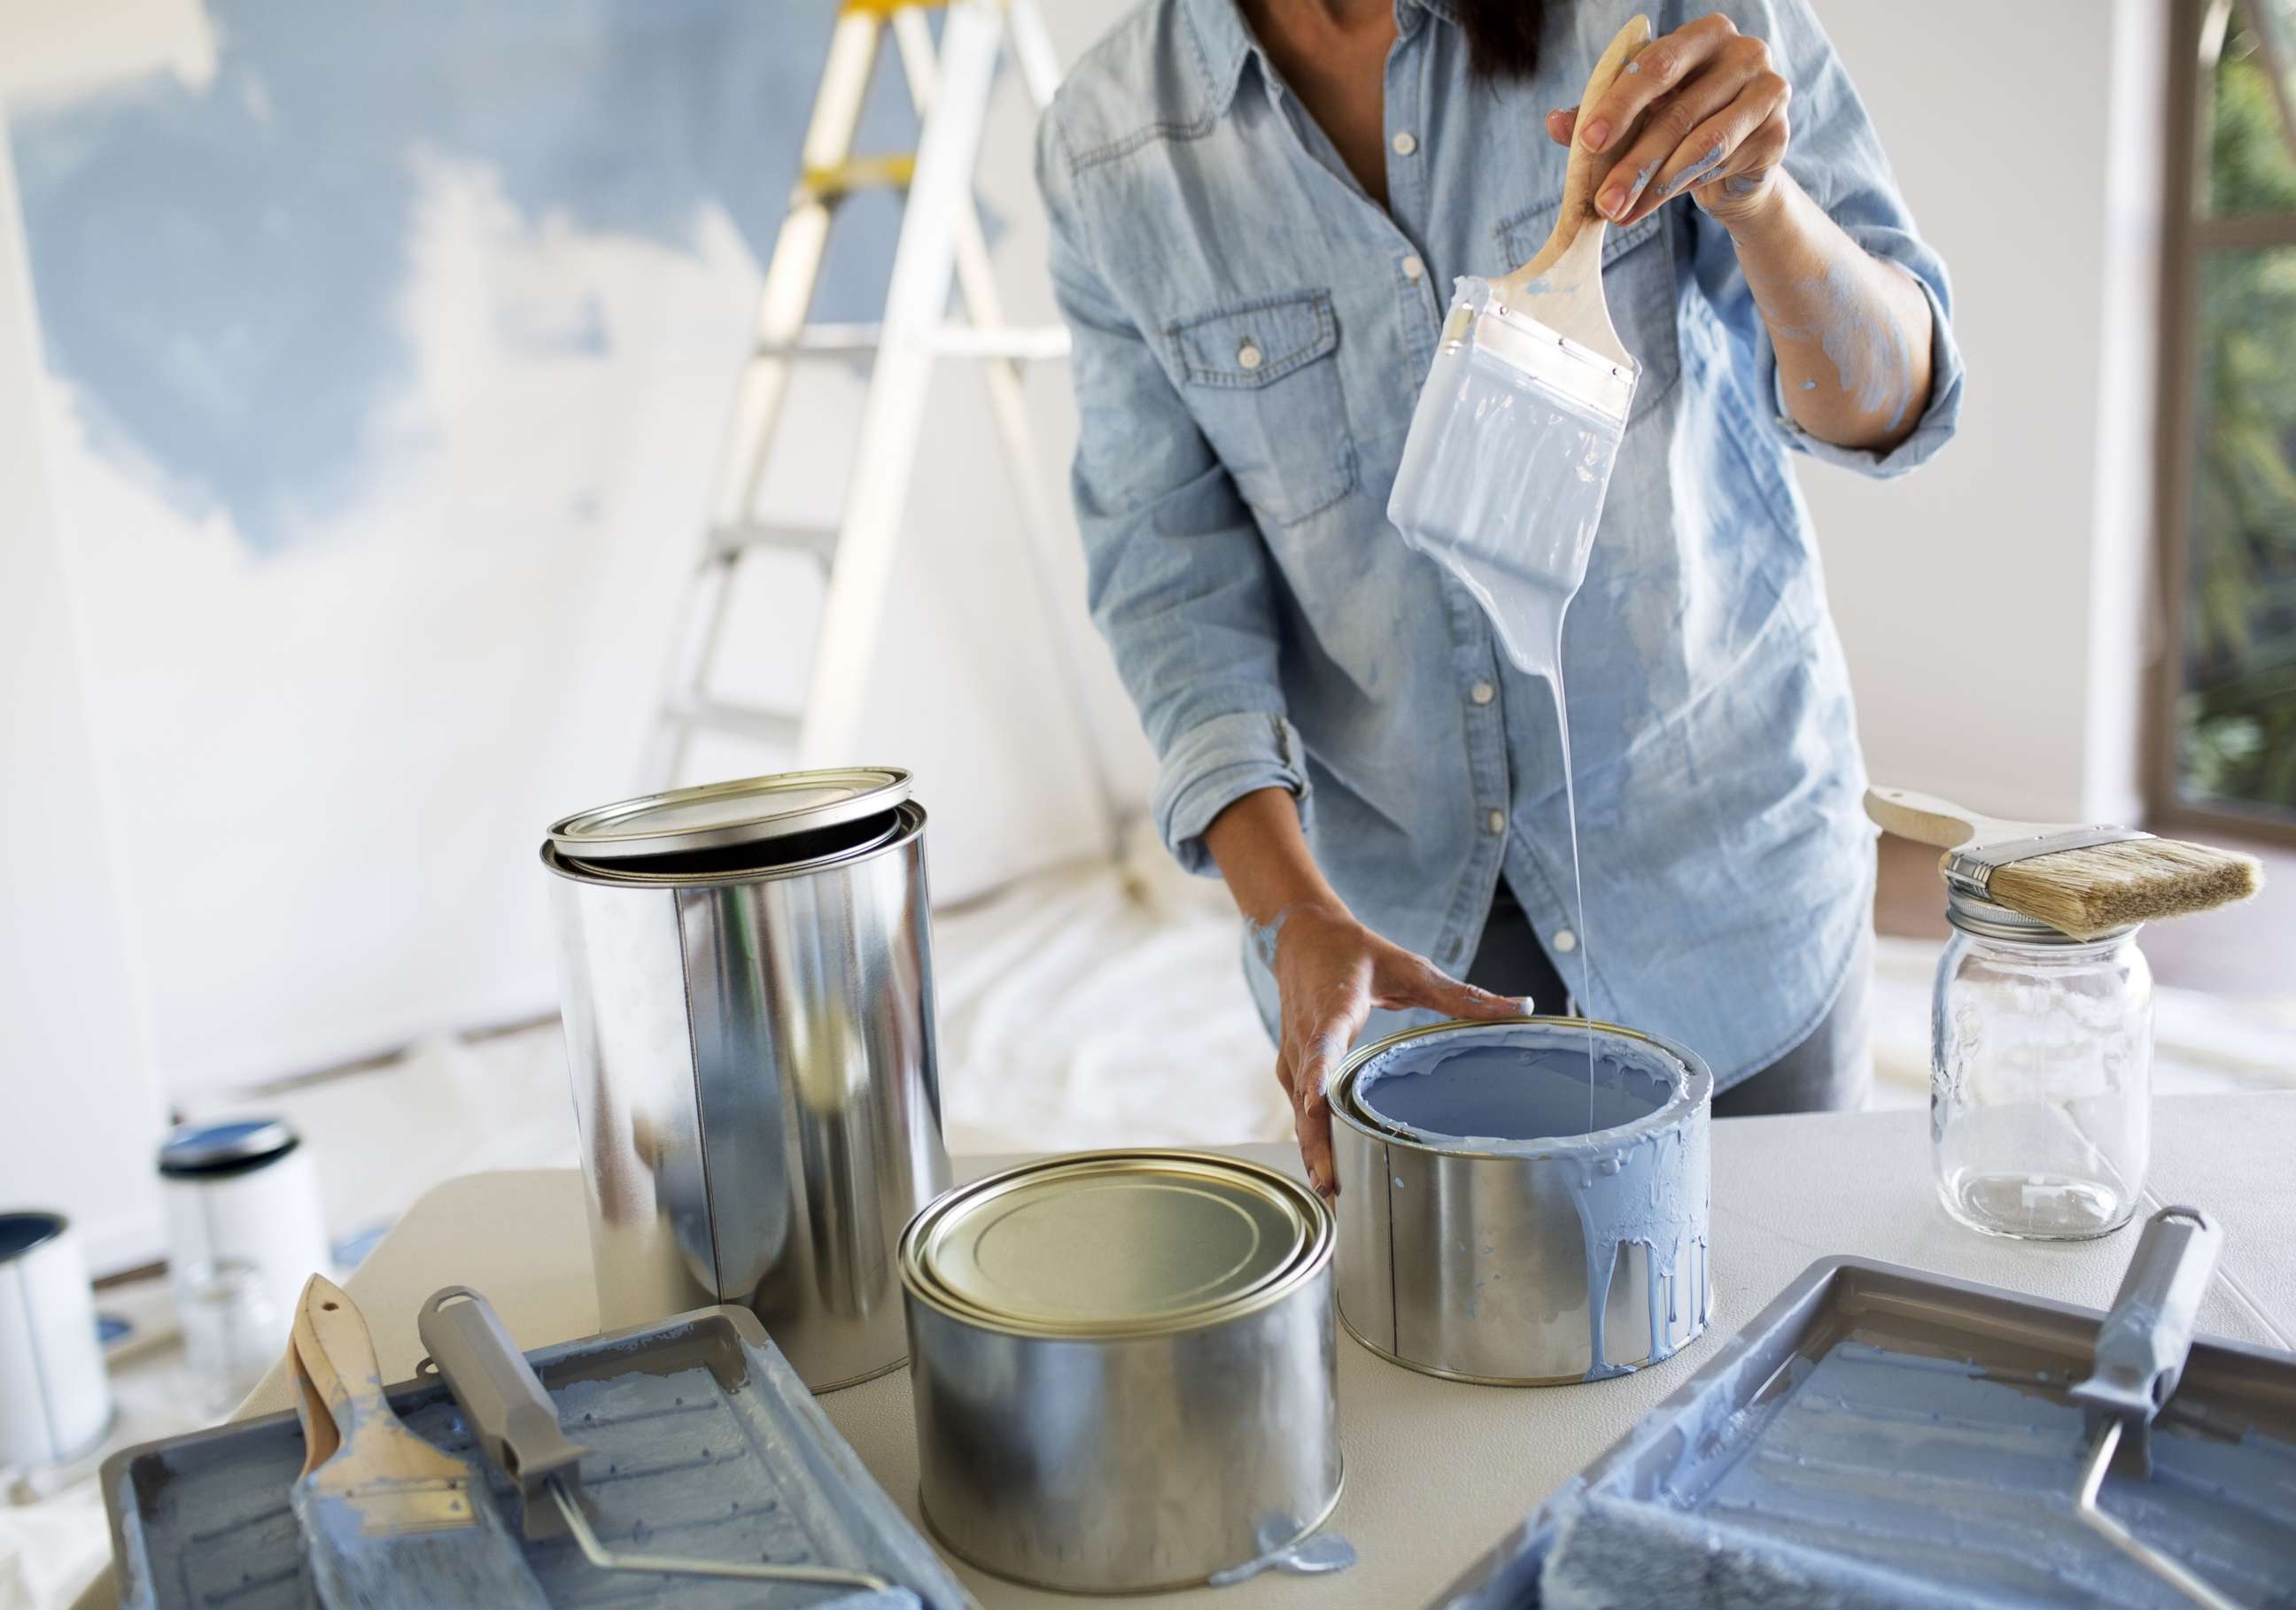 PHOTO: In this undated stock photo, a woman paints the interior of her home with blue paint.